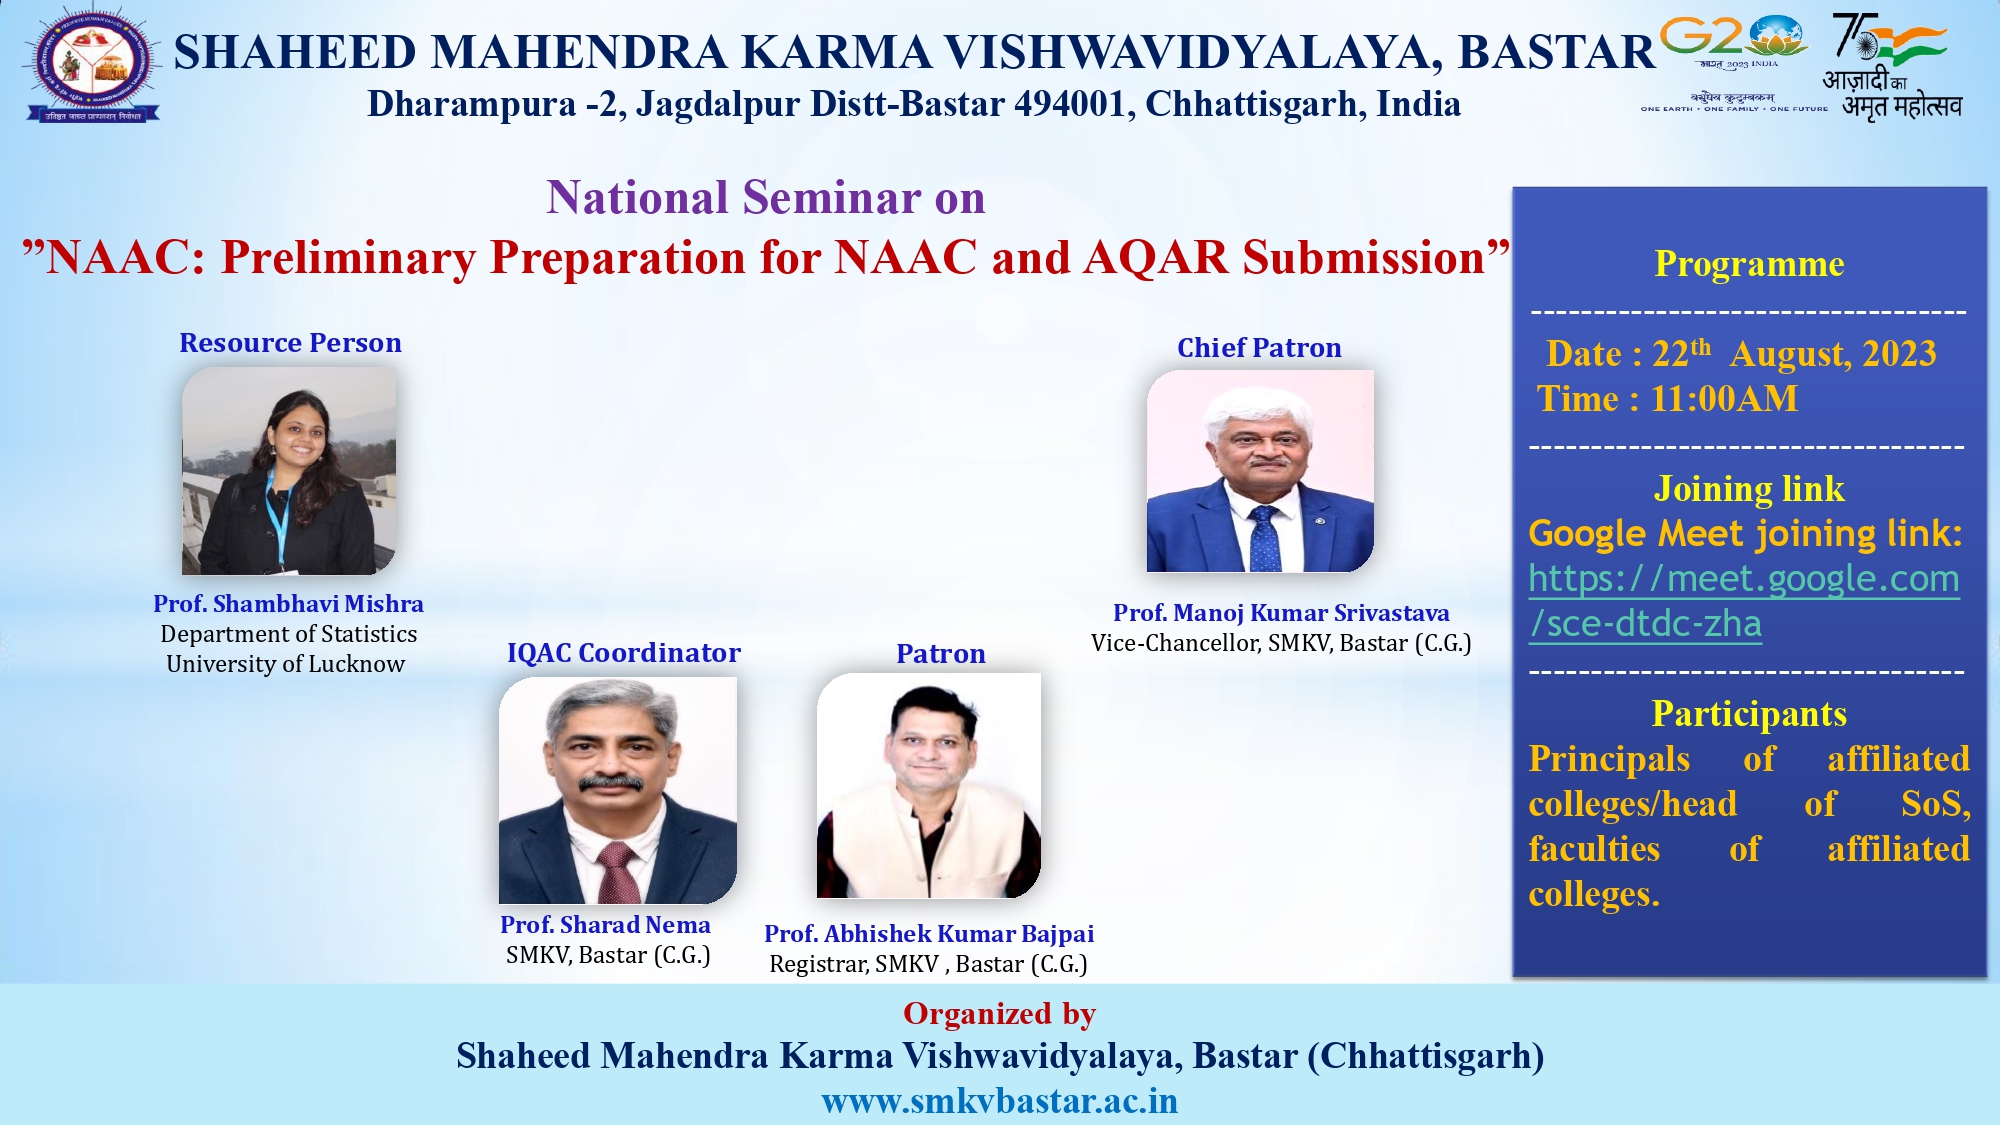 National Seminar on_NAAC Preliminary Preparation for NAAC and AQAR Submission on August 22th 2023